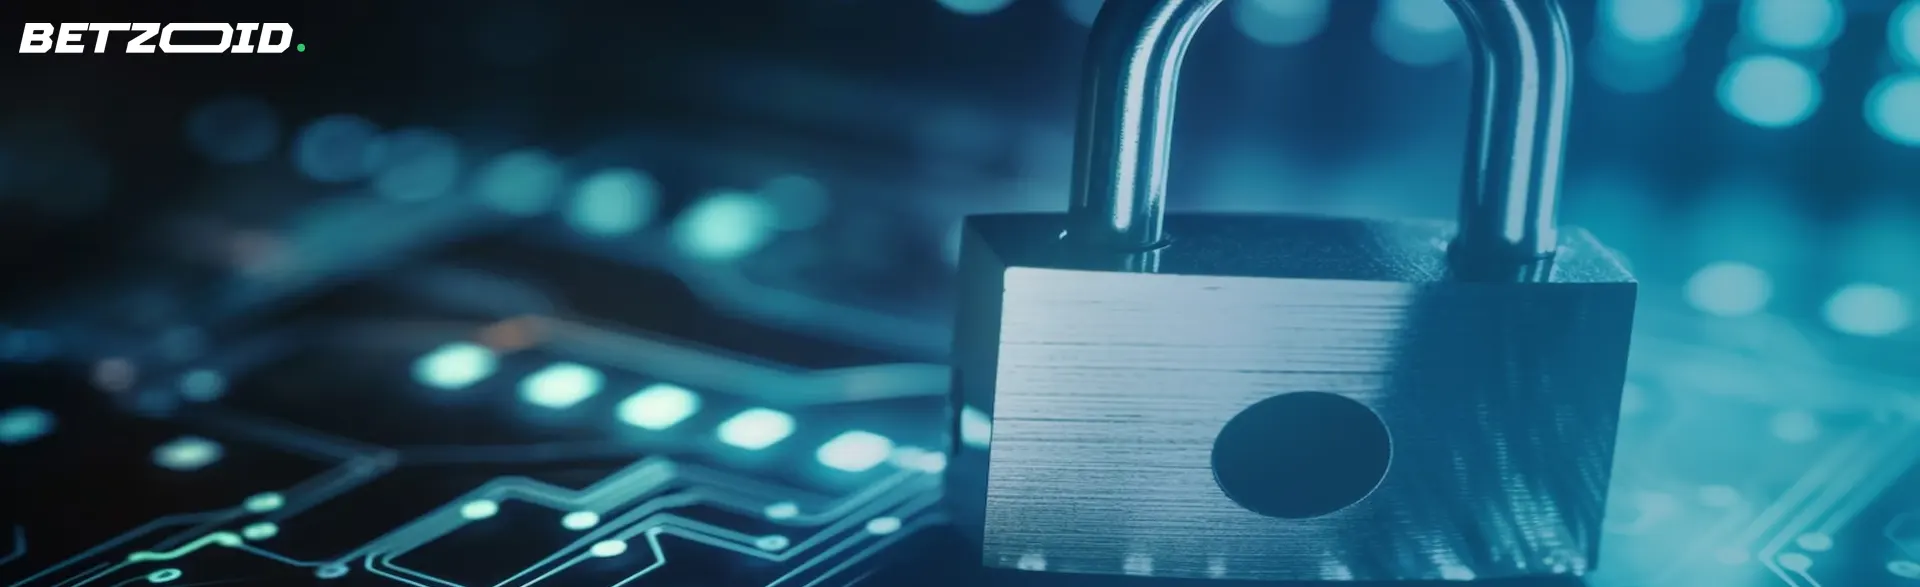 A lock on a background of electronic circuits, symbolizing security for no verification betting sites.